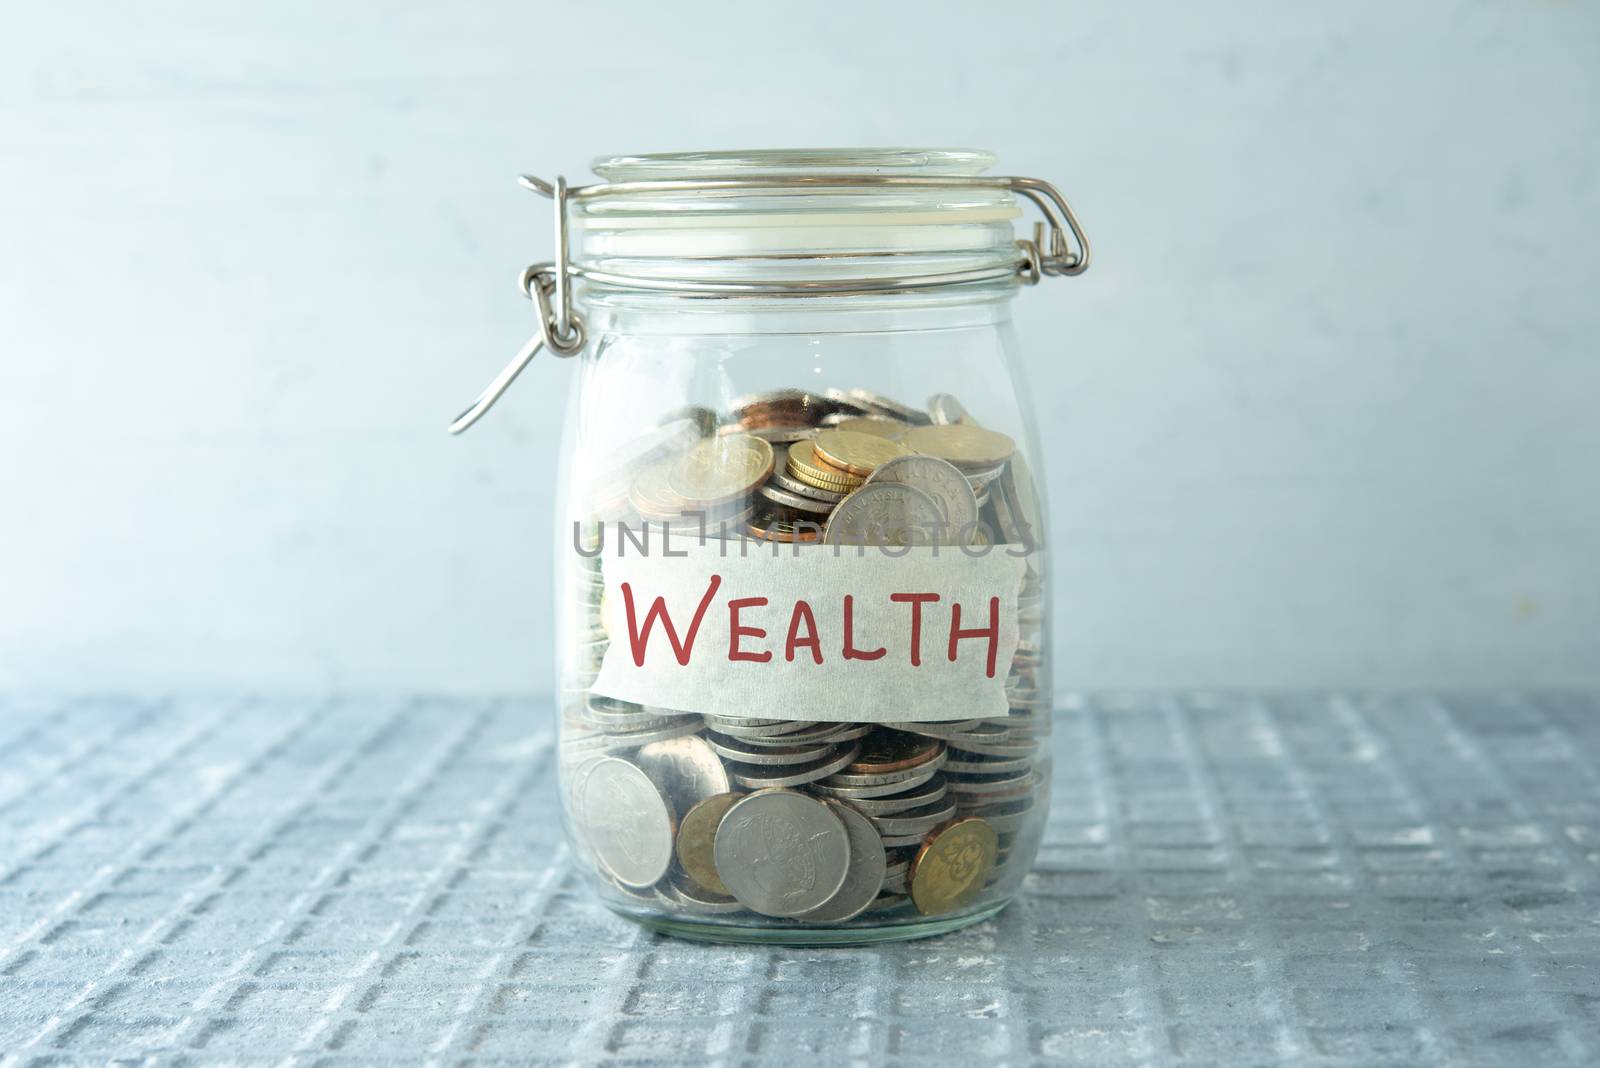 Coins in glass money jar with wealth label, financial concept.